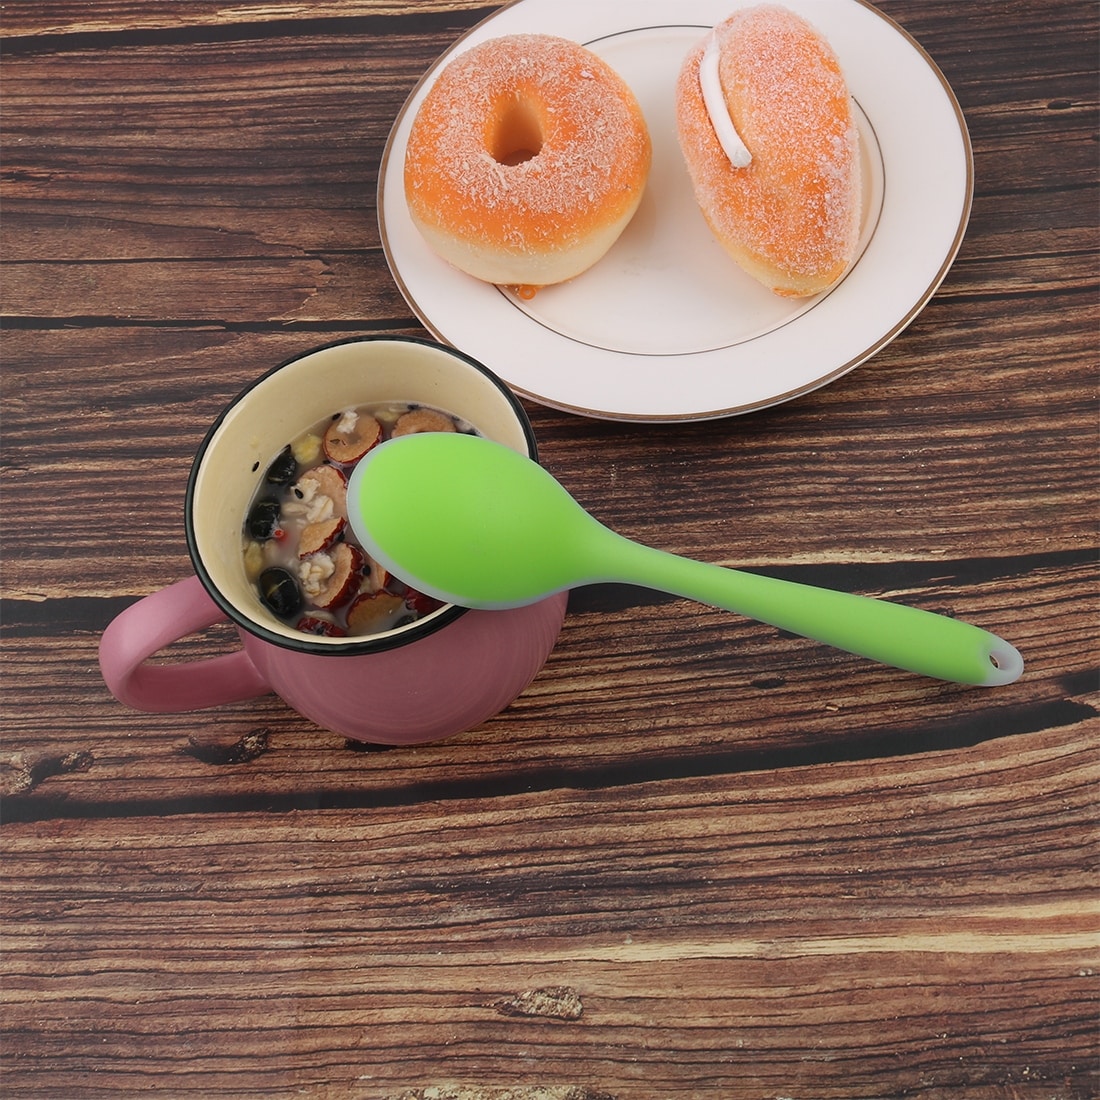 https://ak1.ostkcdn.com/images/products/is/images/direct/0cbfe81355987ebacdc50c7c210dc9fd843e54e9/Silicone-Dinner-Dessert-Spoon-Serving-Eating-Utensil.jpg